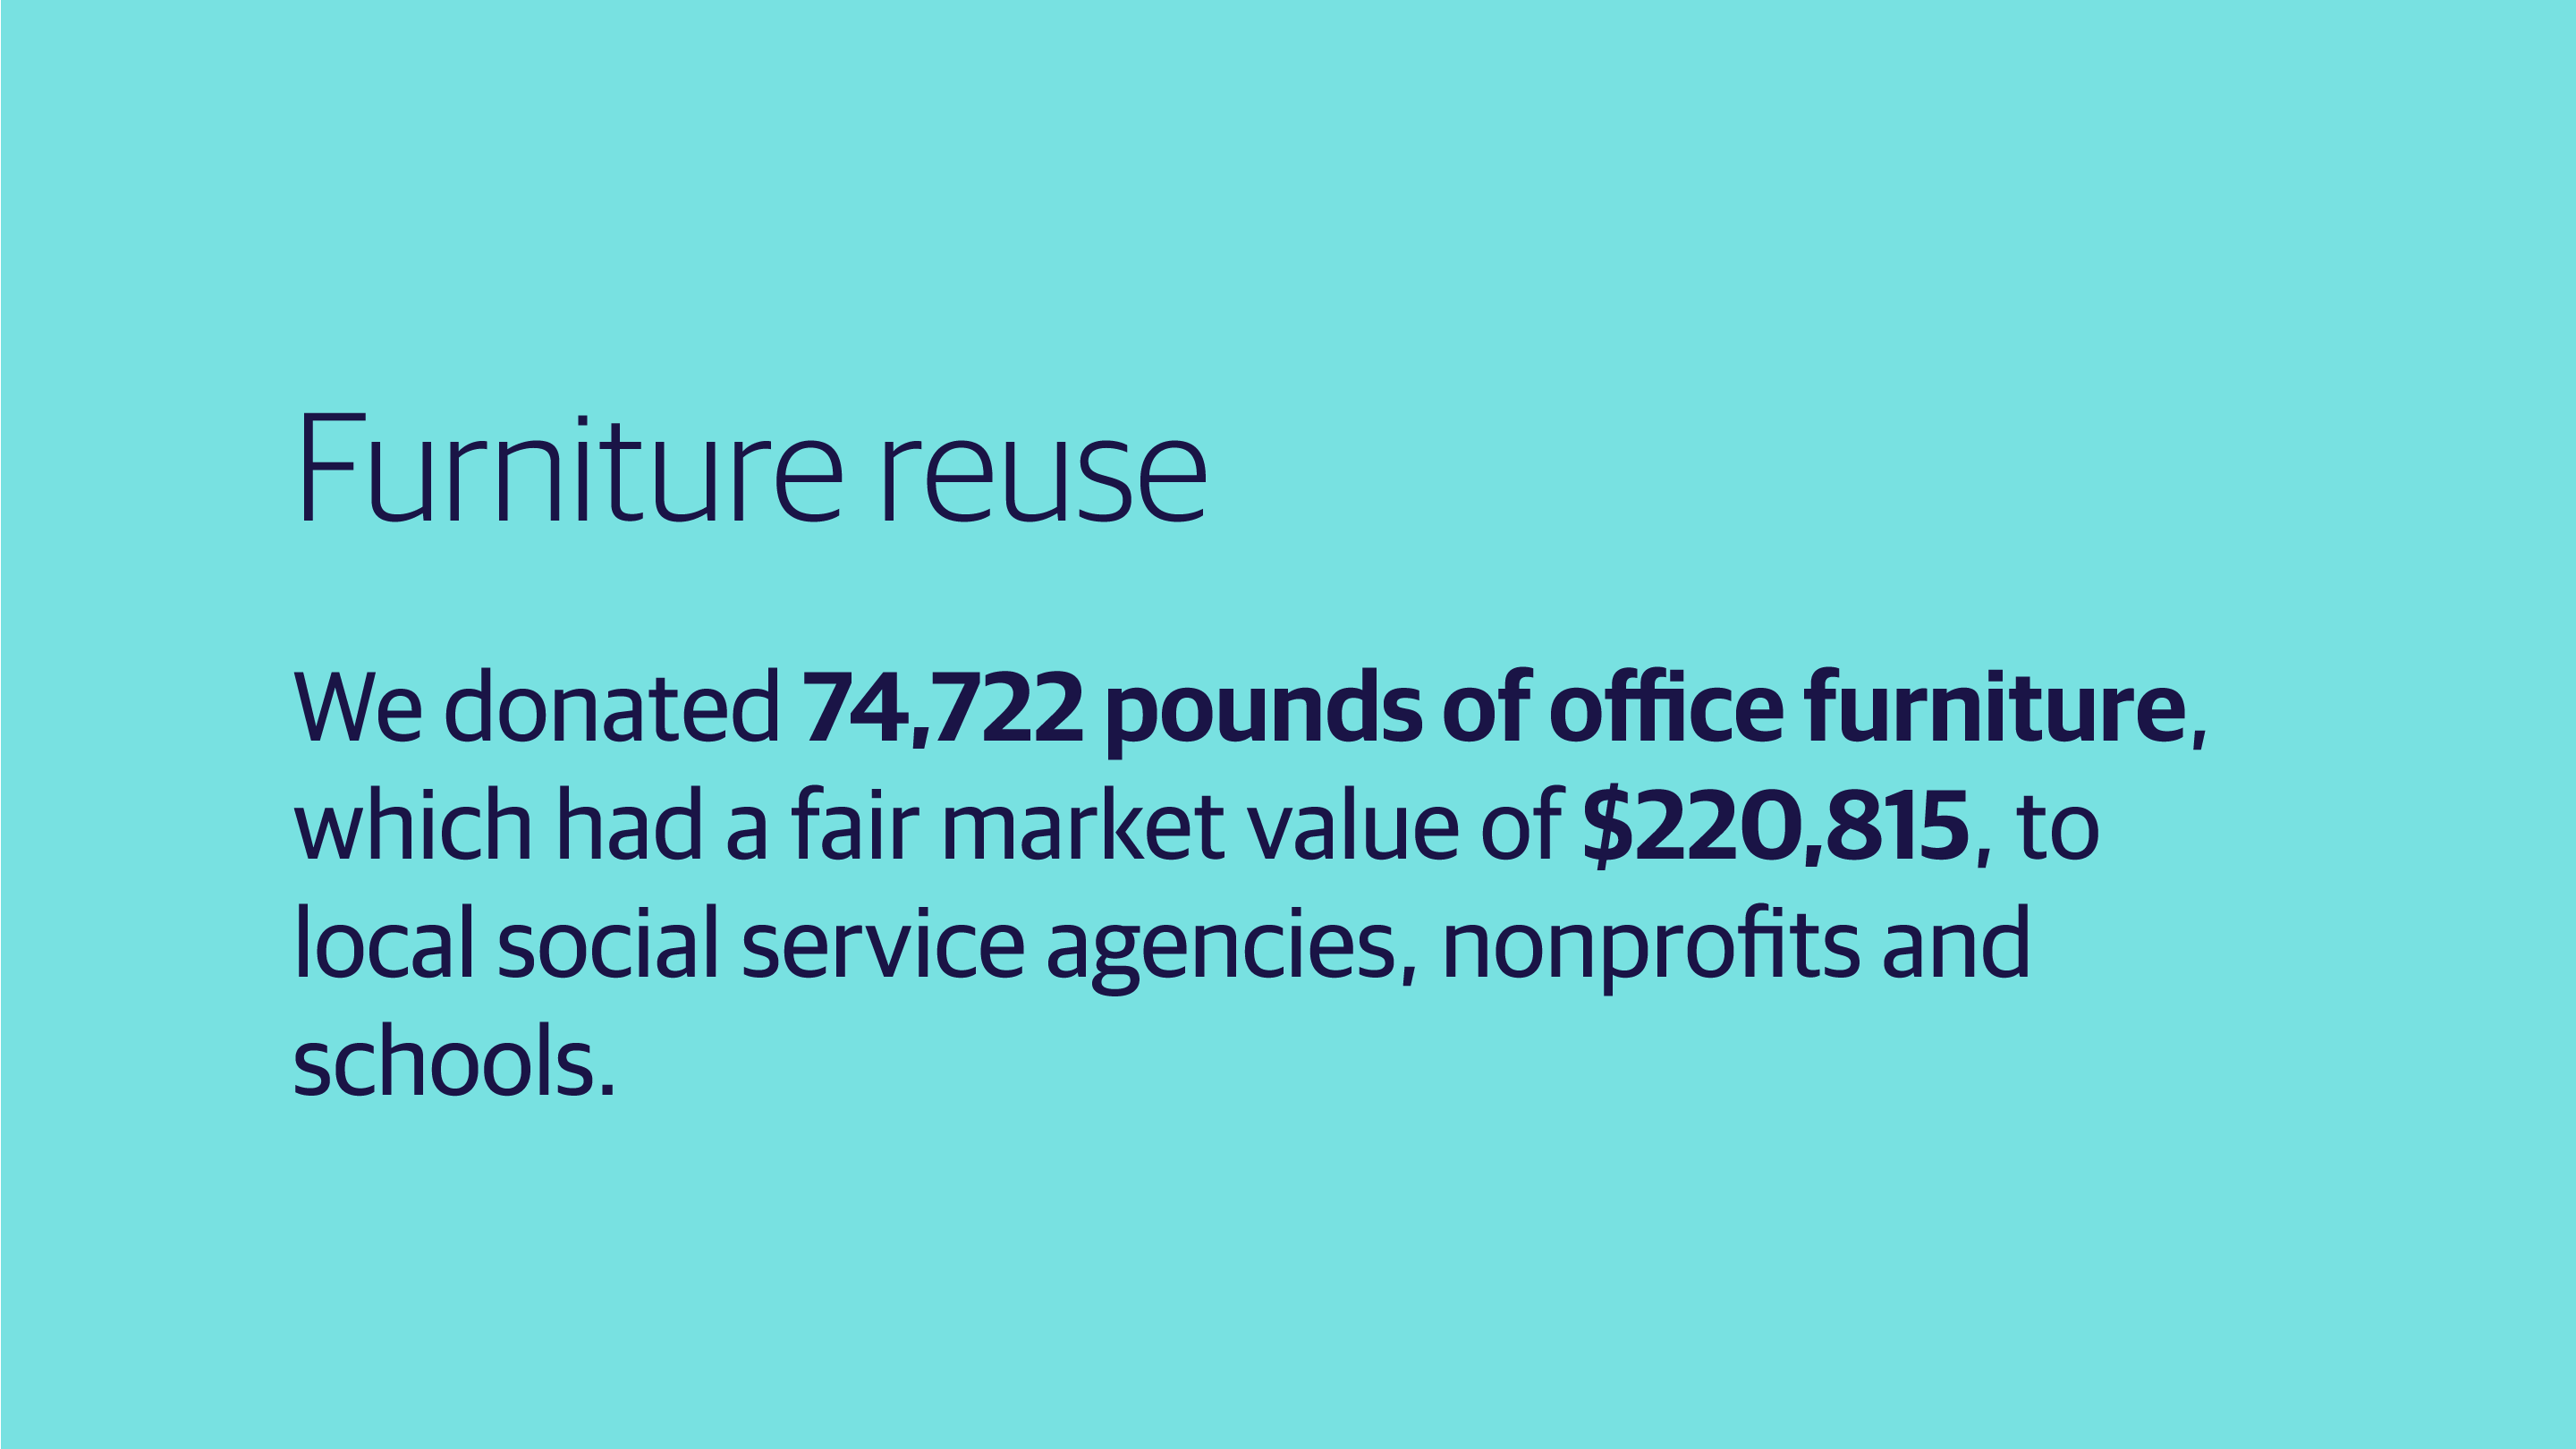 (slide 2 of 4) Furniture reuse: We donated 74,722 pounds of office furniture, which had a fair market value of $220,815, to local social service agencies, nonprofits and schools.  . 